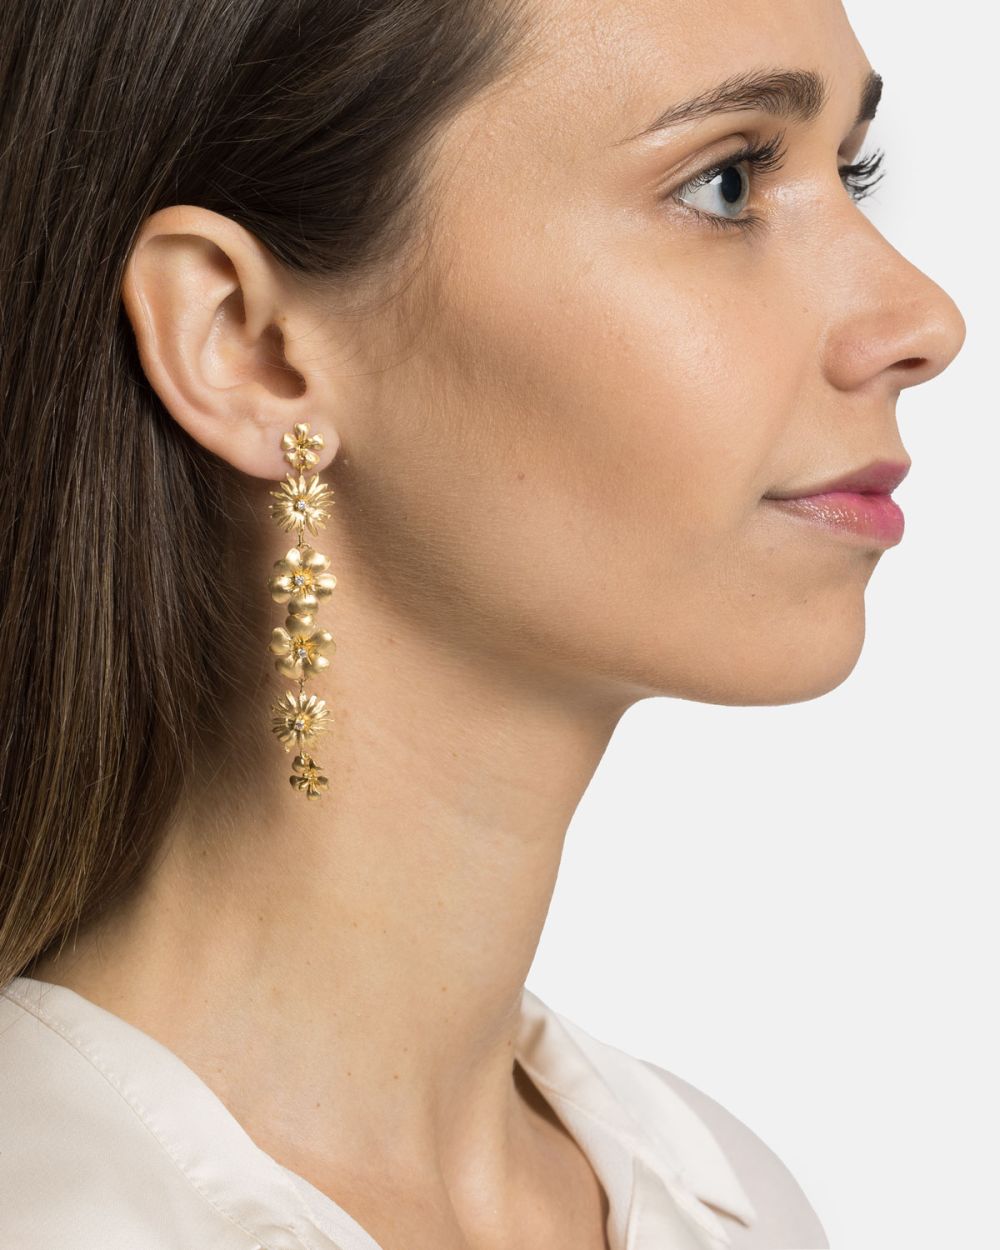 Family Earrings in Gold Plated Silver with Zirconias